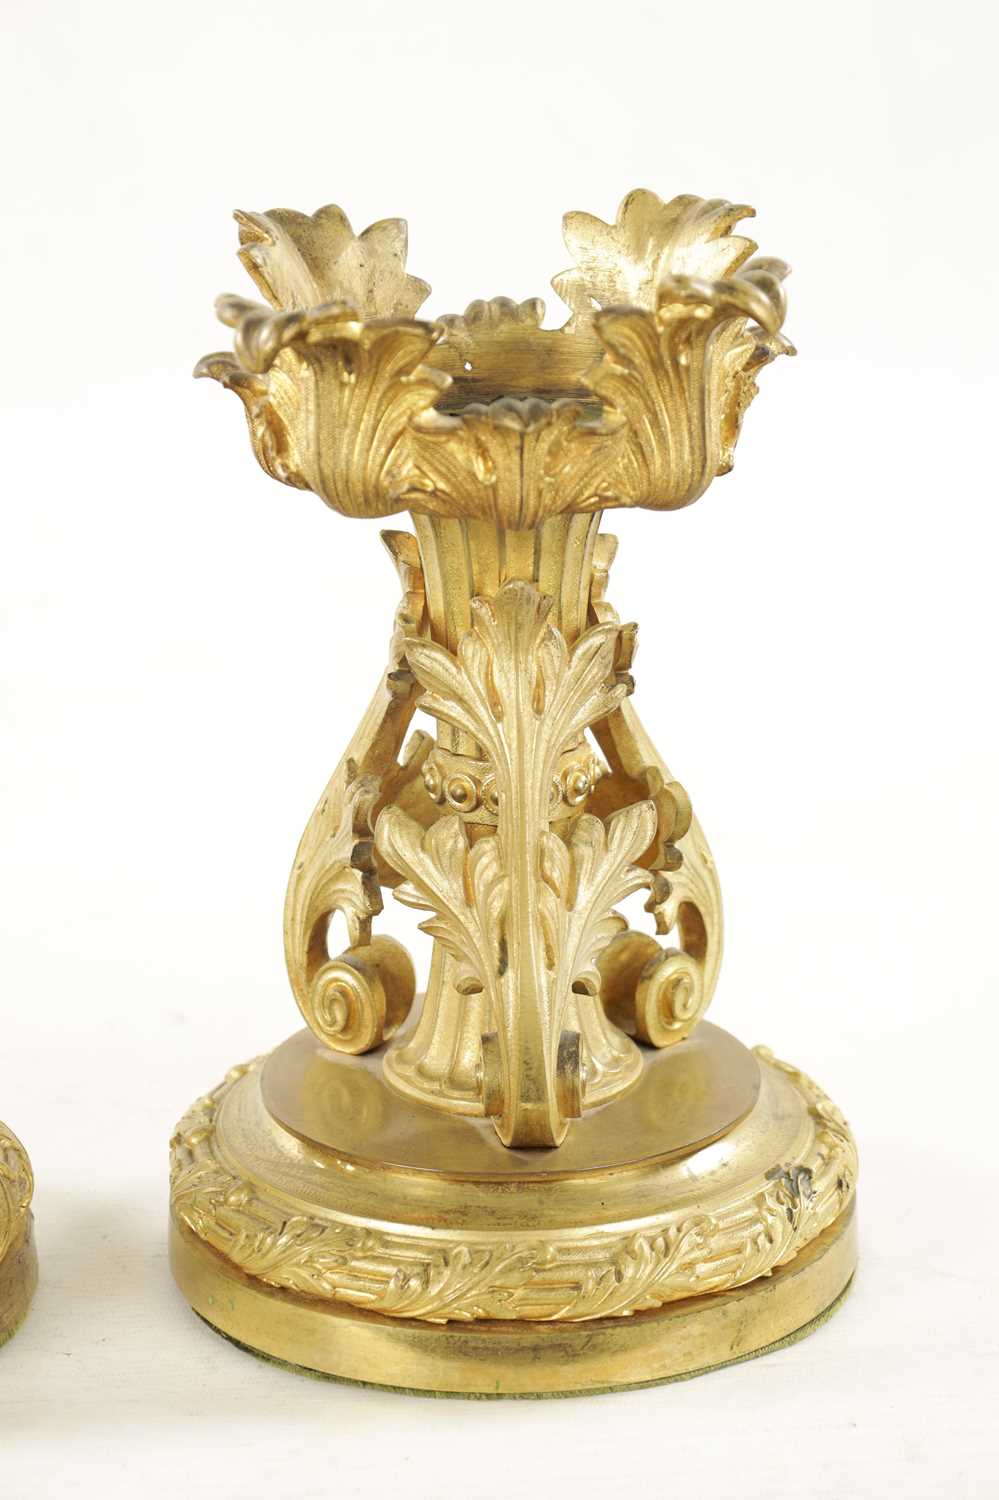 A PAIR OF EARLY 19TH CENTURY GILT ORMOLU FIRE DOGS - Image 4 of 5